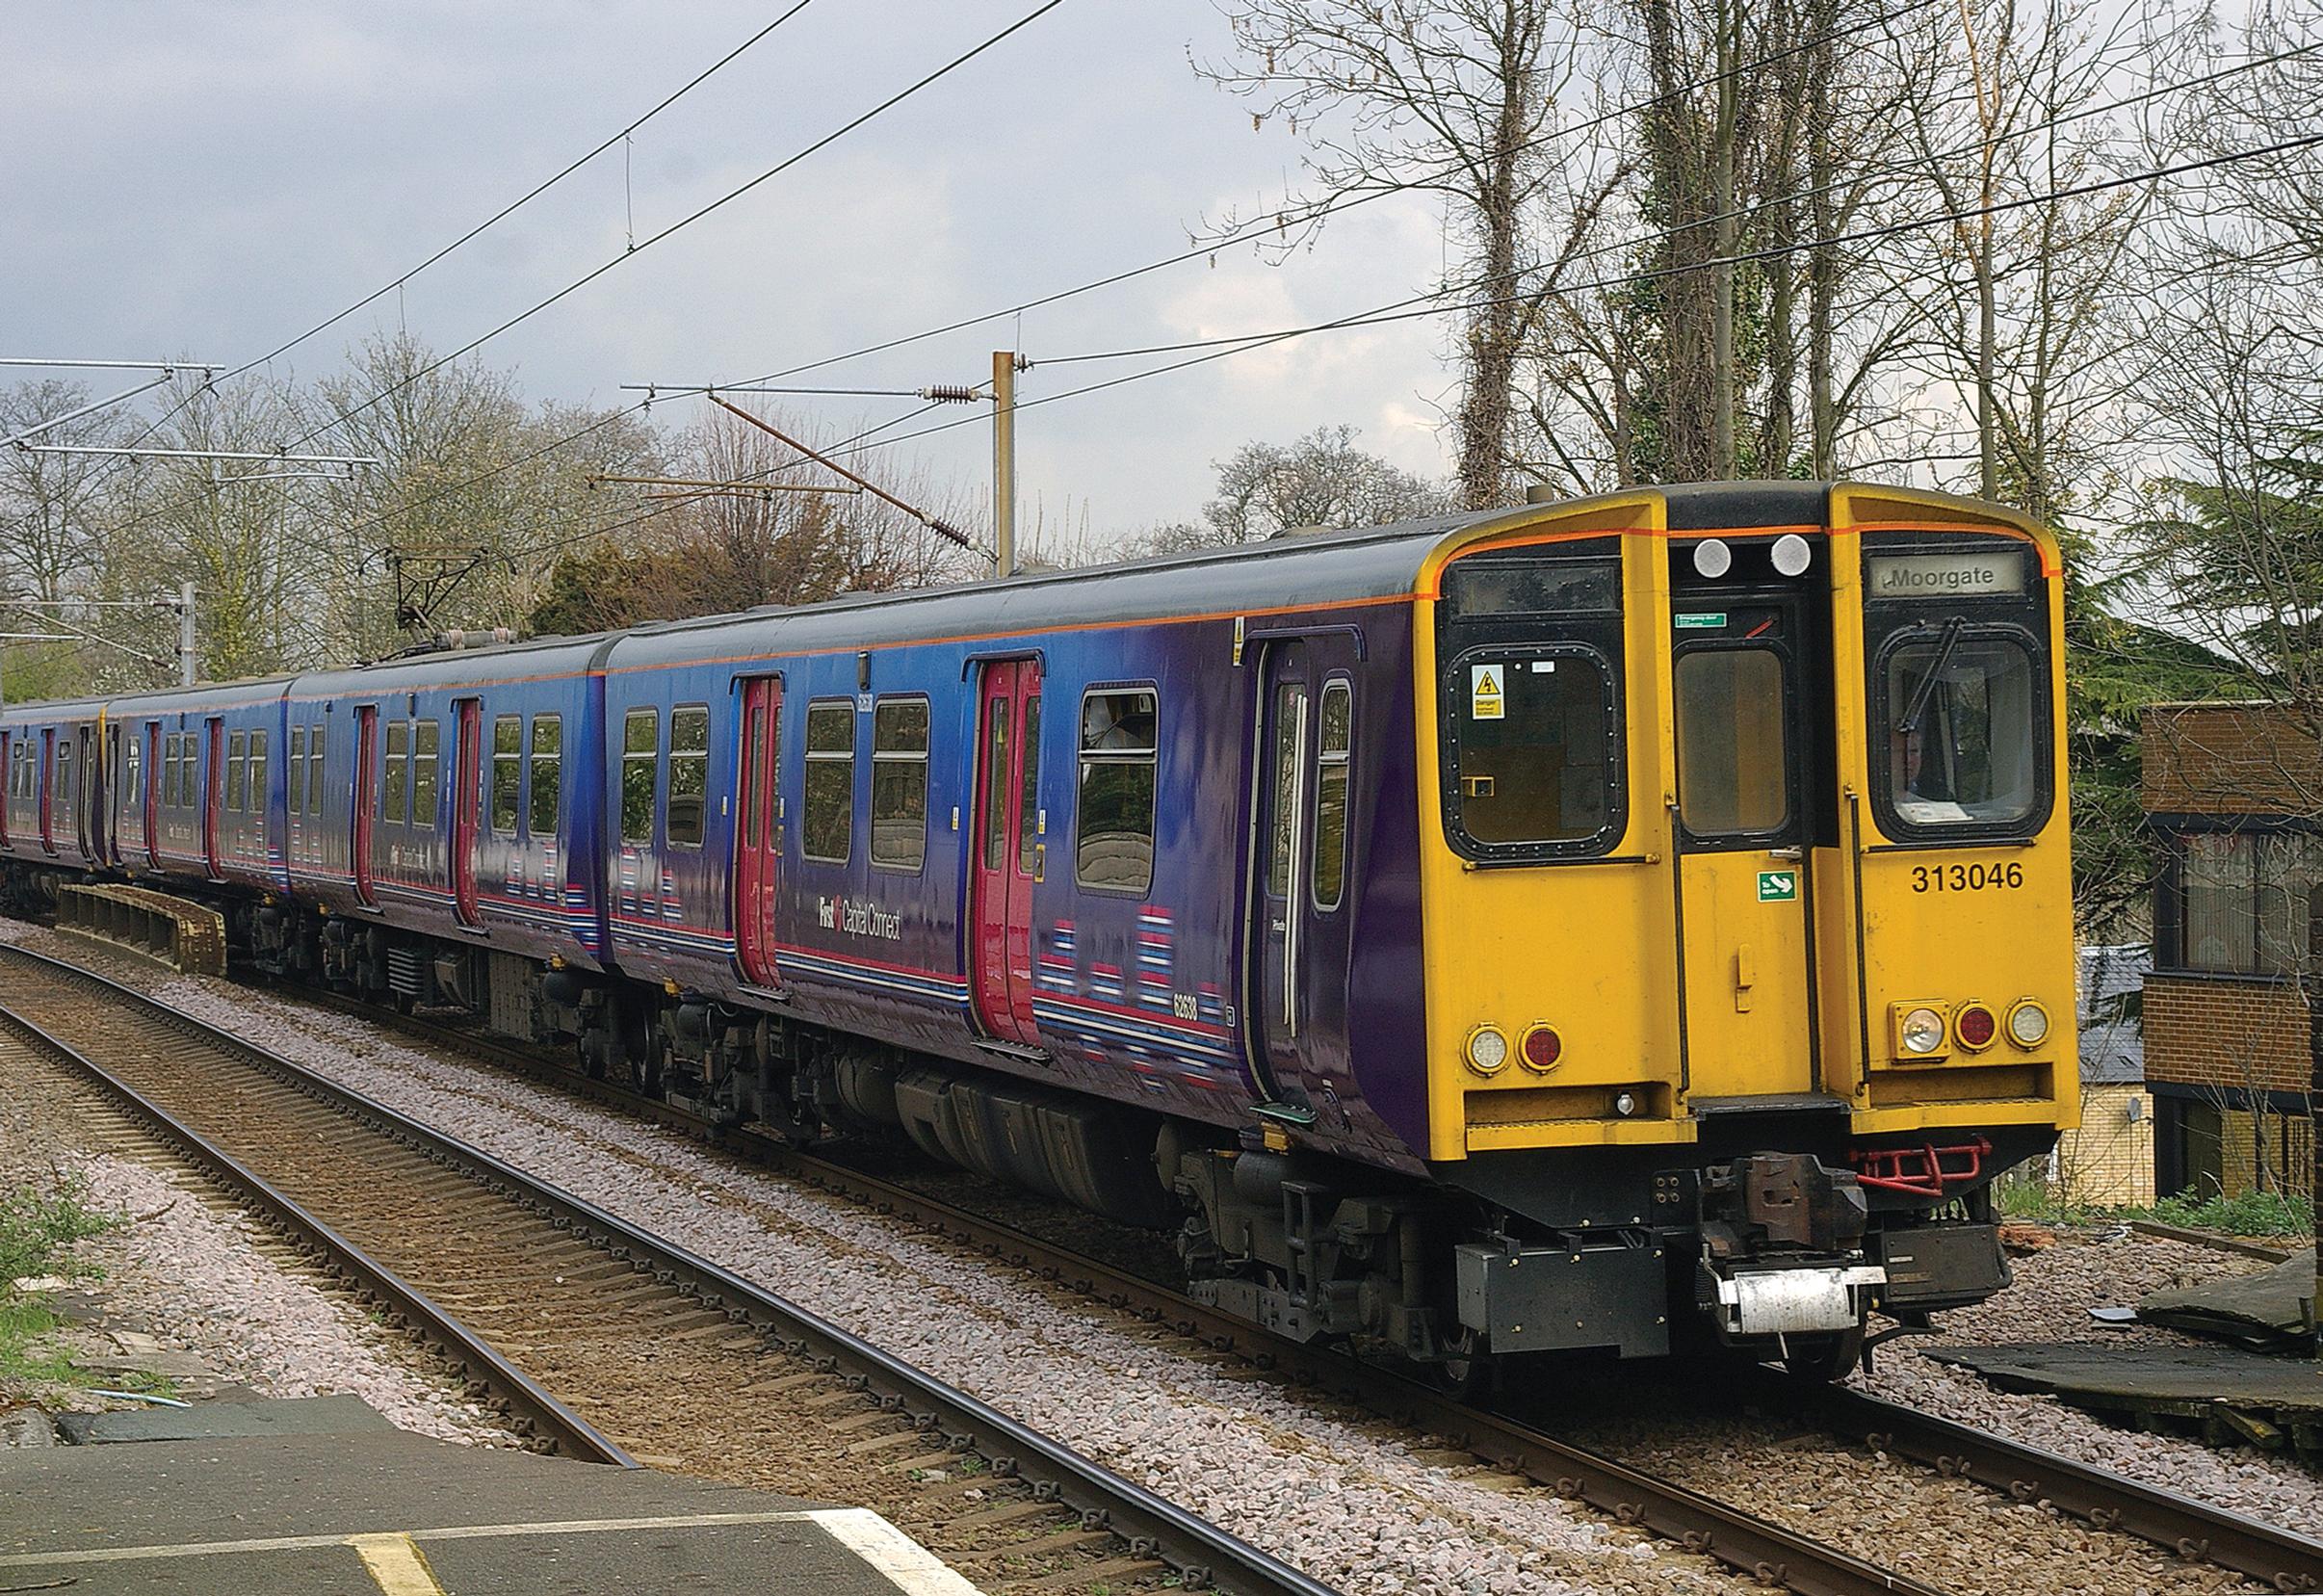 Hertfordshire sees the case for a regional transport authority